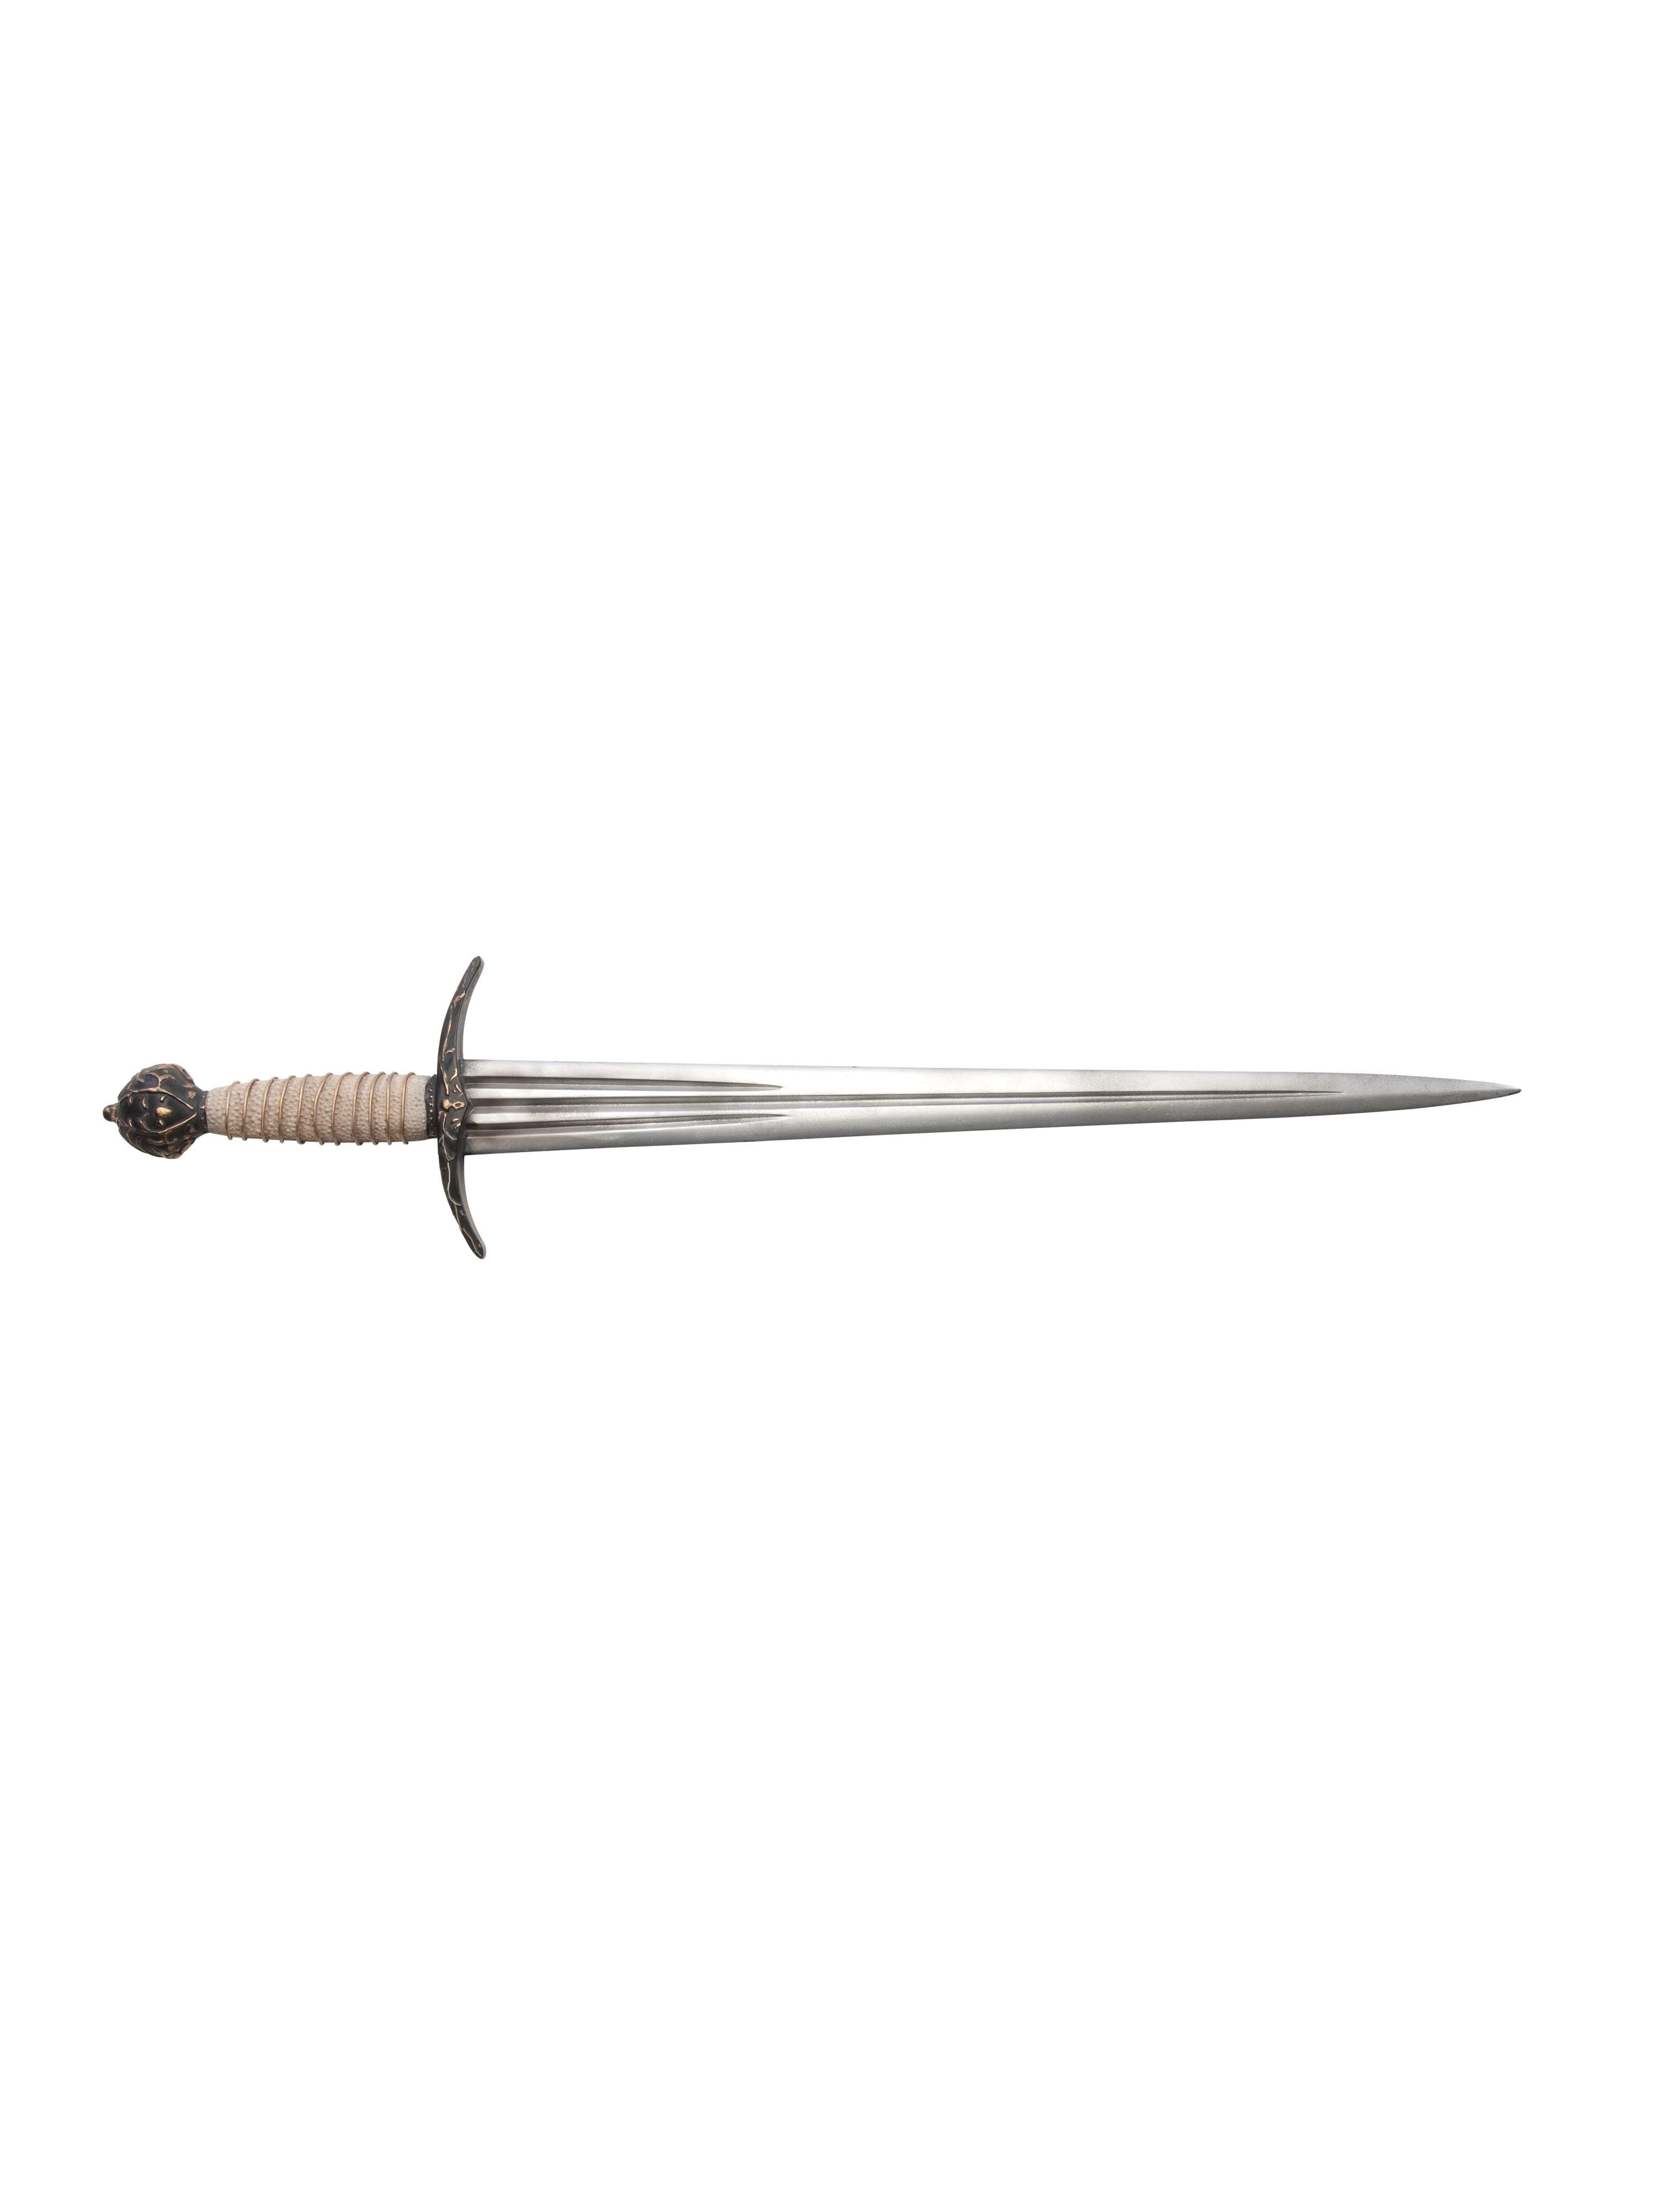 Adult Snow White and the Huntsman Snow Whites Sword - costumes.com